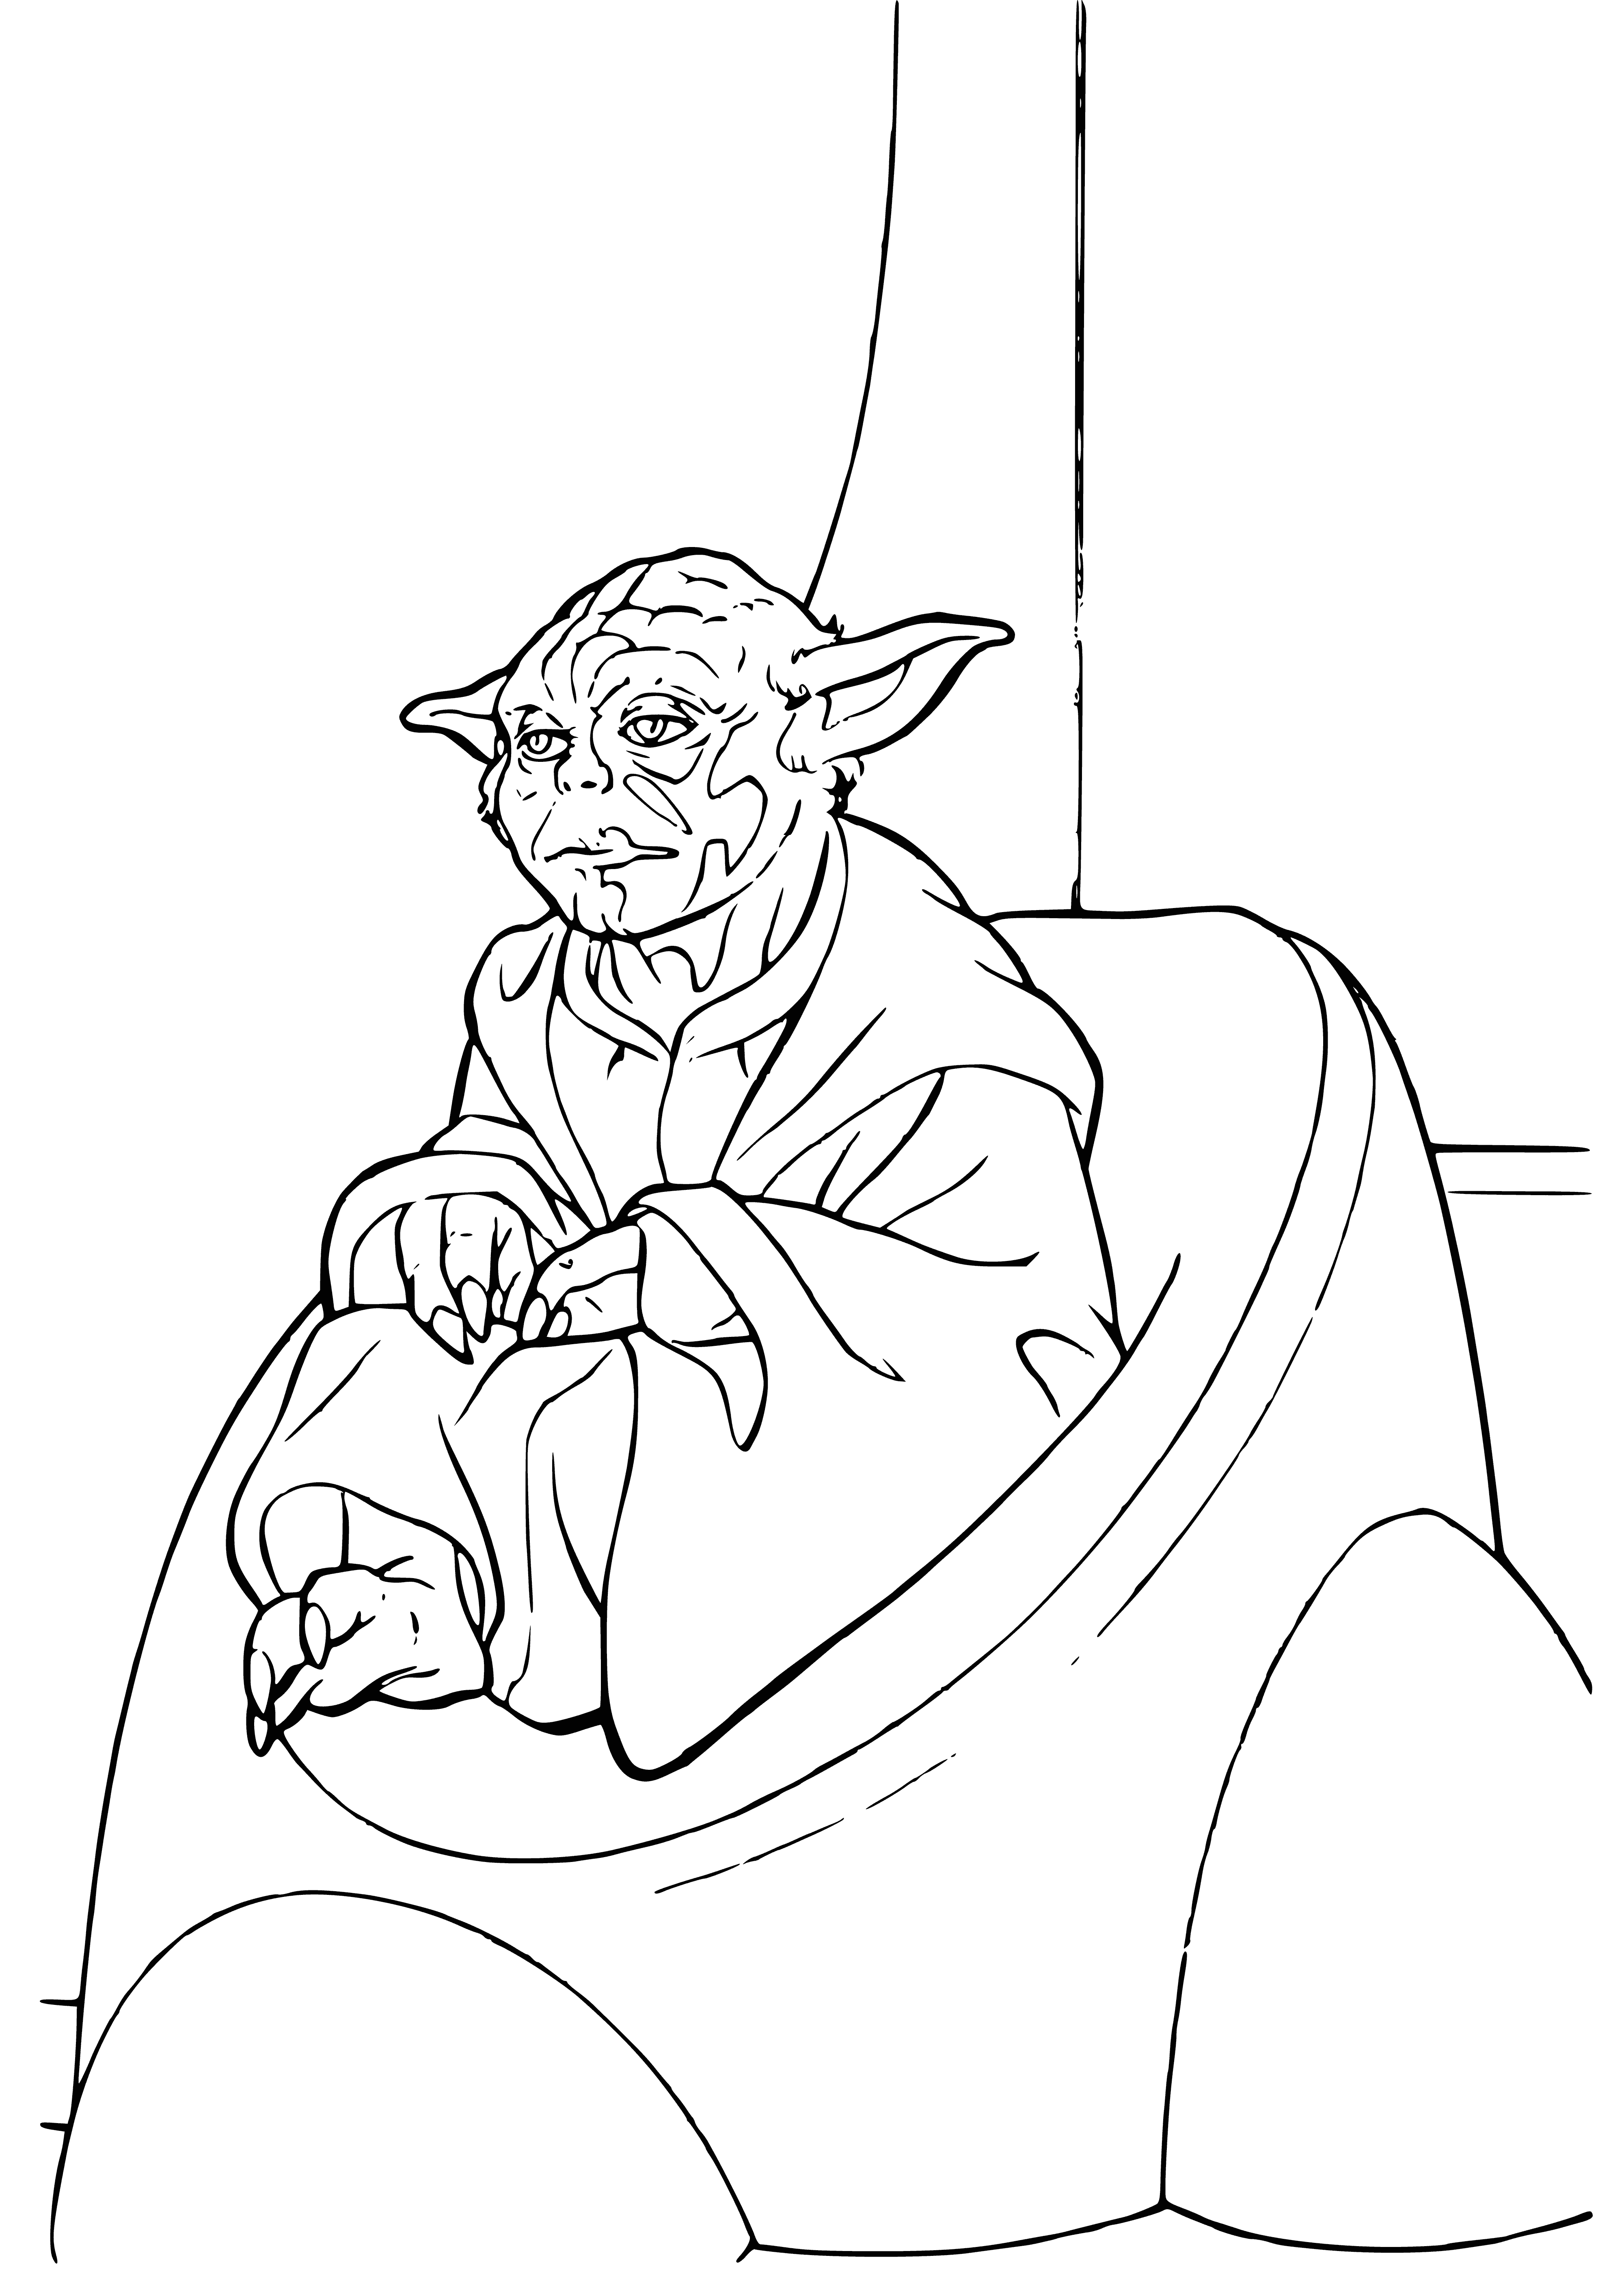 coloring page: Coloring page of Jedi Master Yoda from "Star Wars: Episode I - The Phantom Menace" on a swampy planet holding a lightsaber.